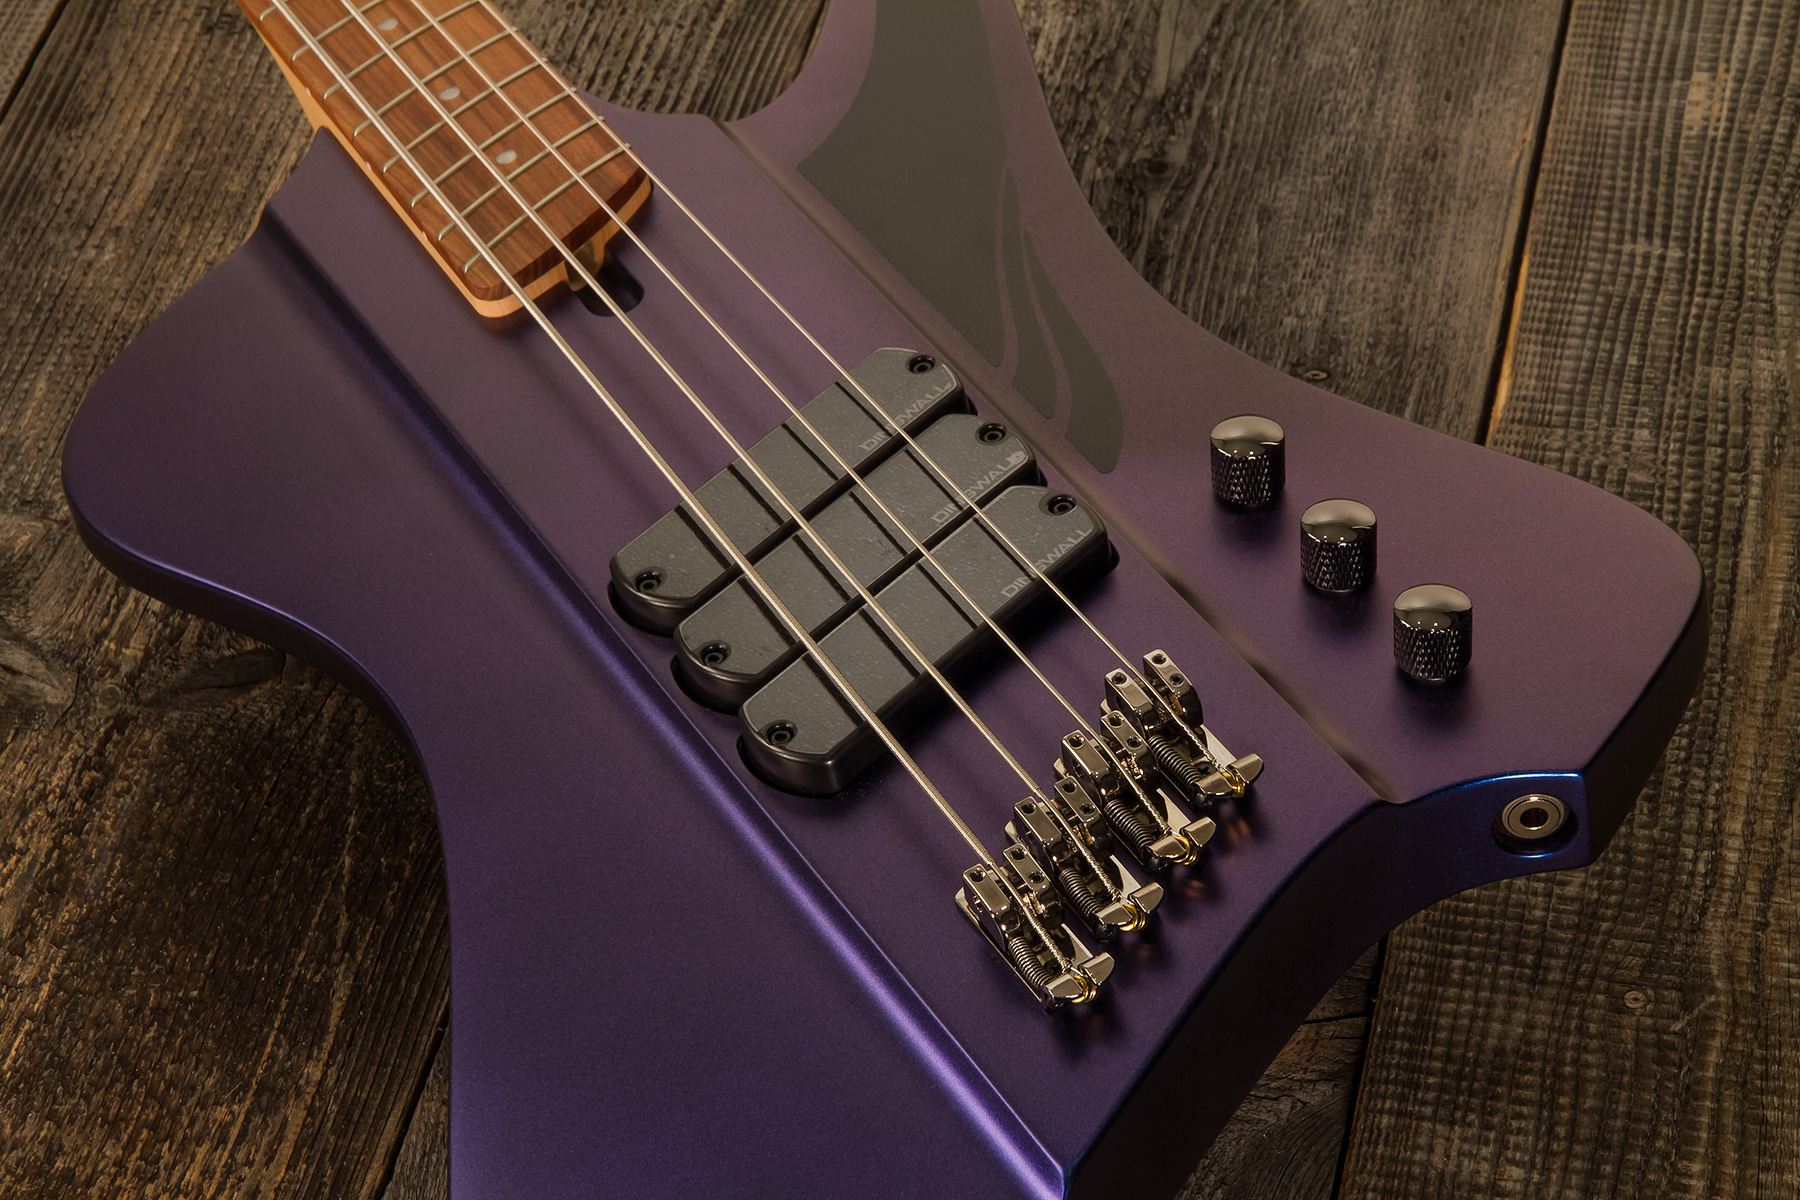 Dingwall D-roc Standard 4c 3-pickups Pf - Blue To Purple Colorshift - Solid body electric bass - Variation 3